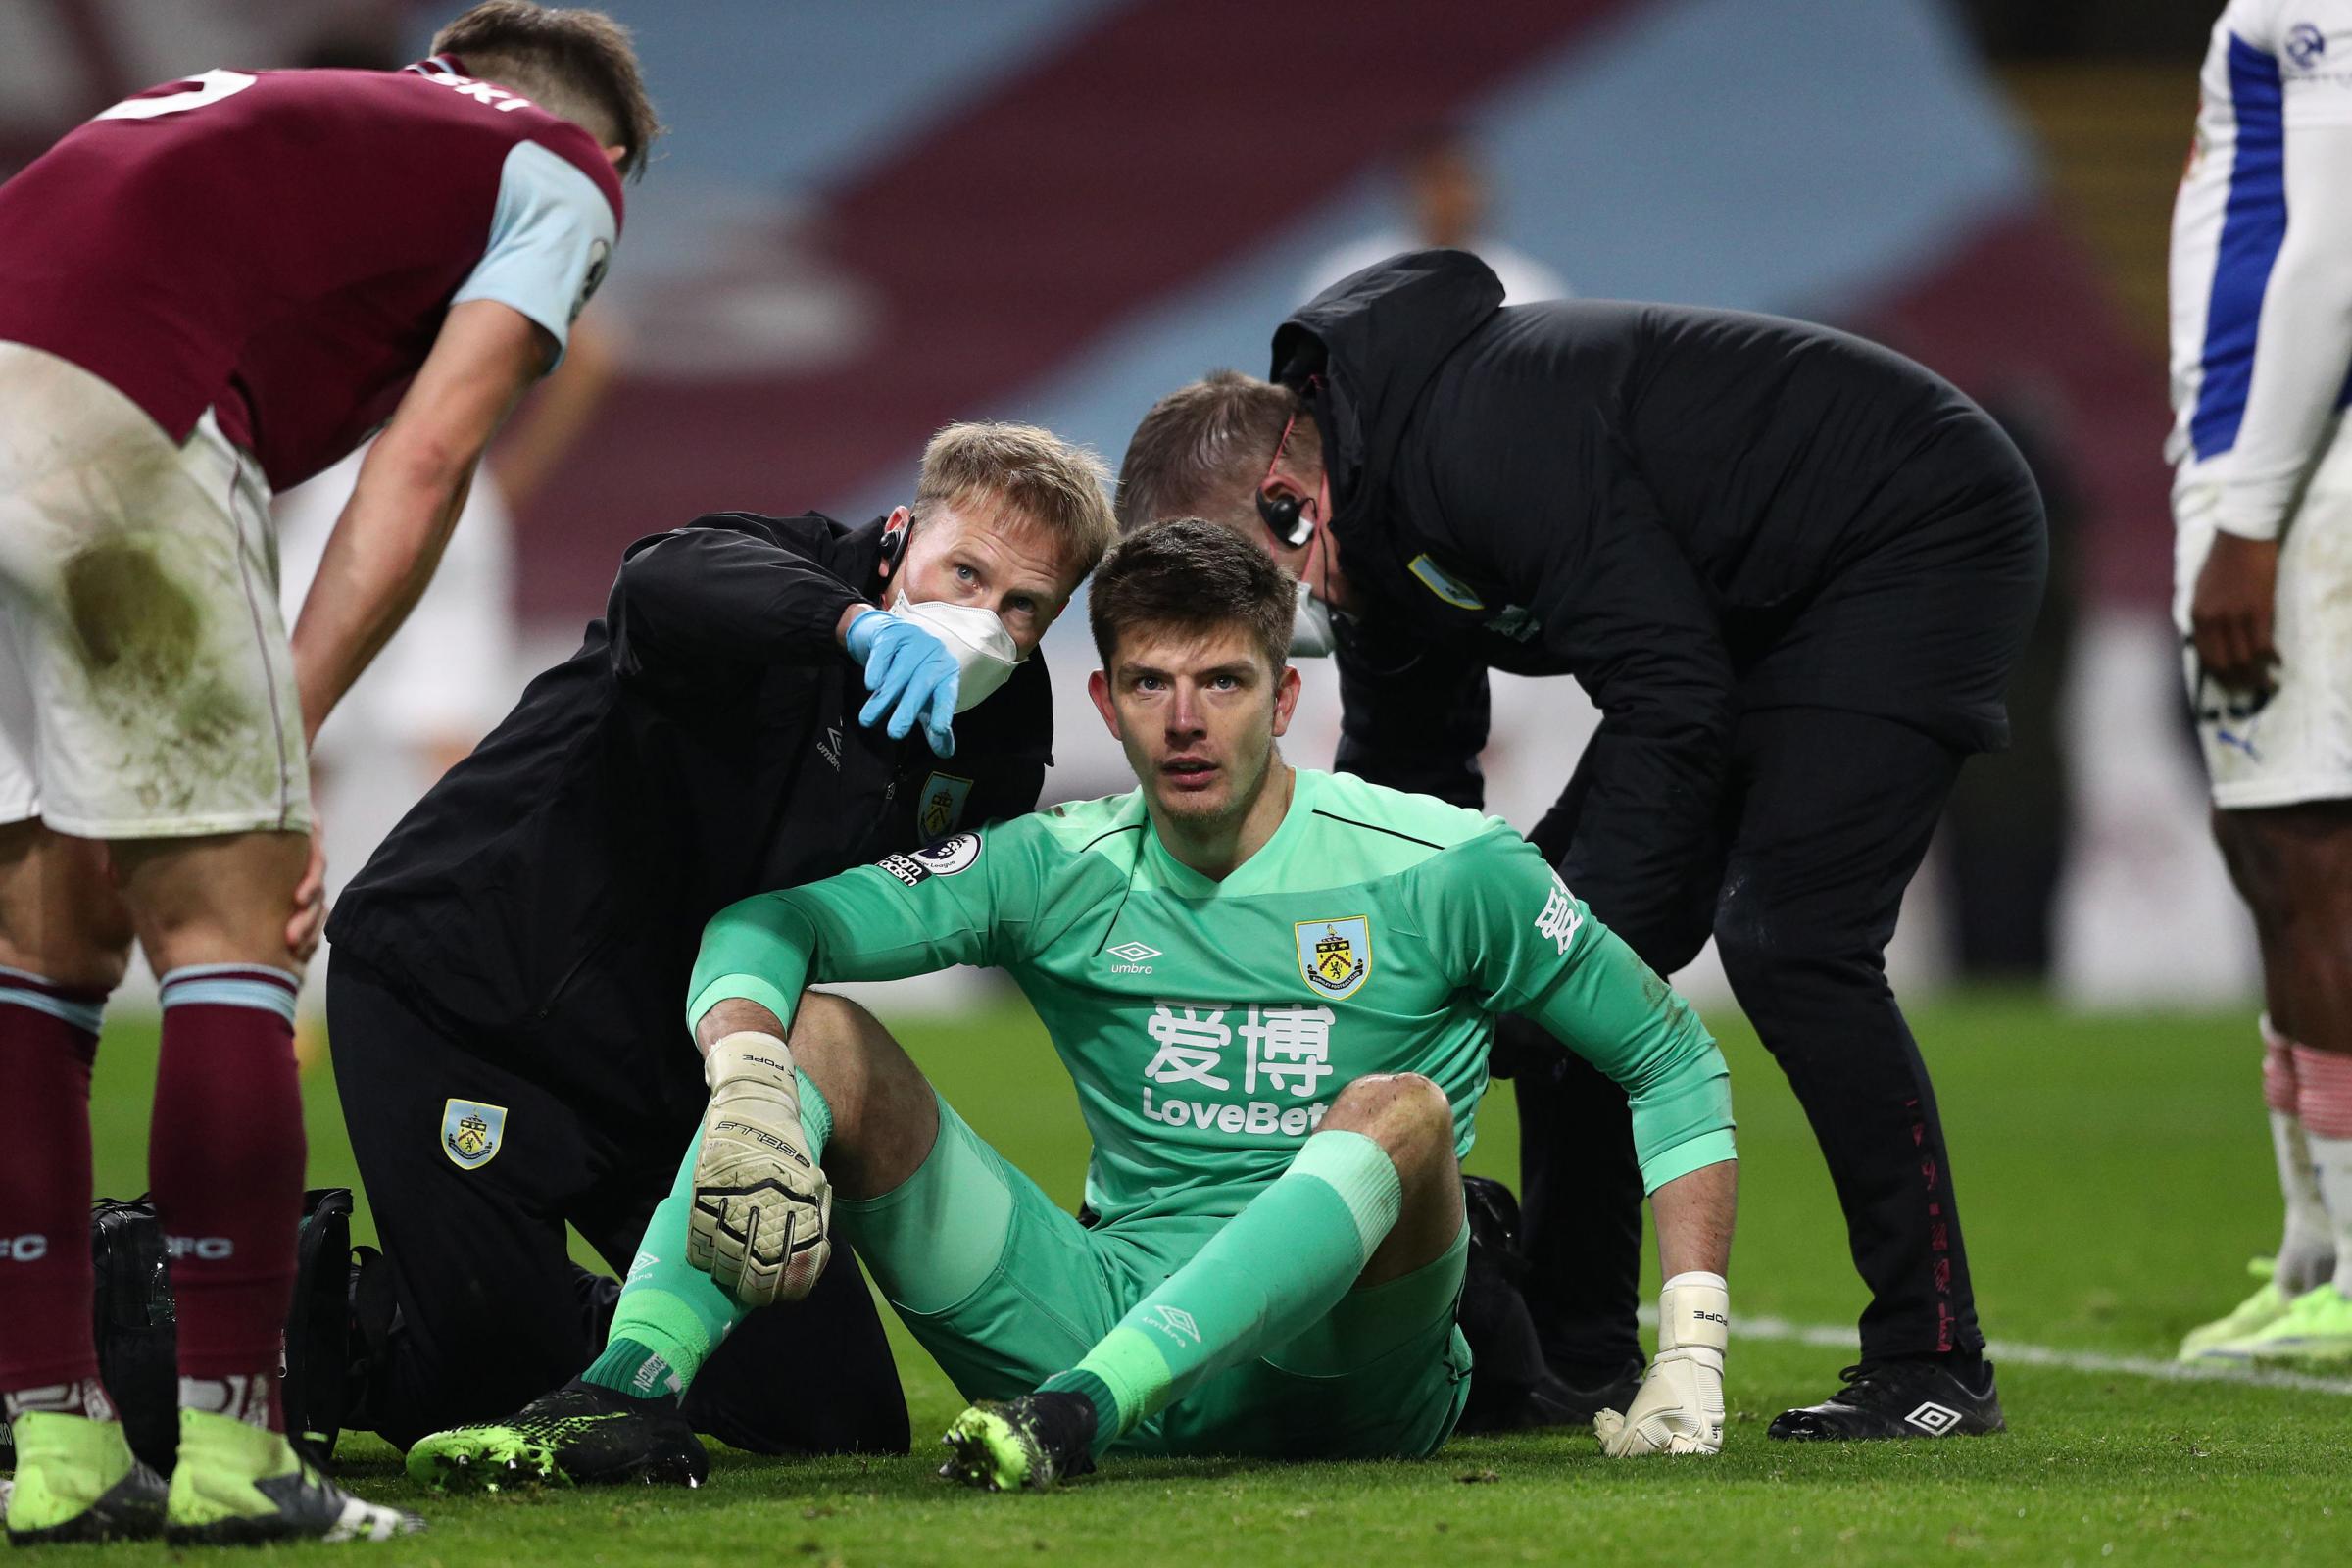 Nick Pope's heroics typify Burnley's mindset says manager Sean Dyche